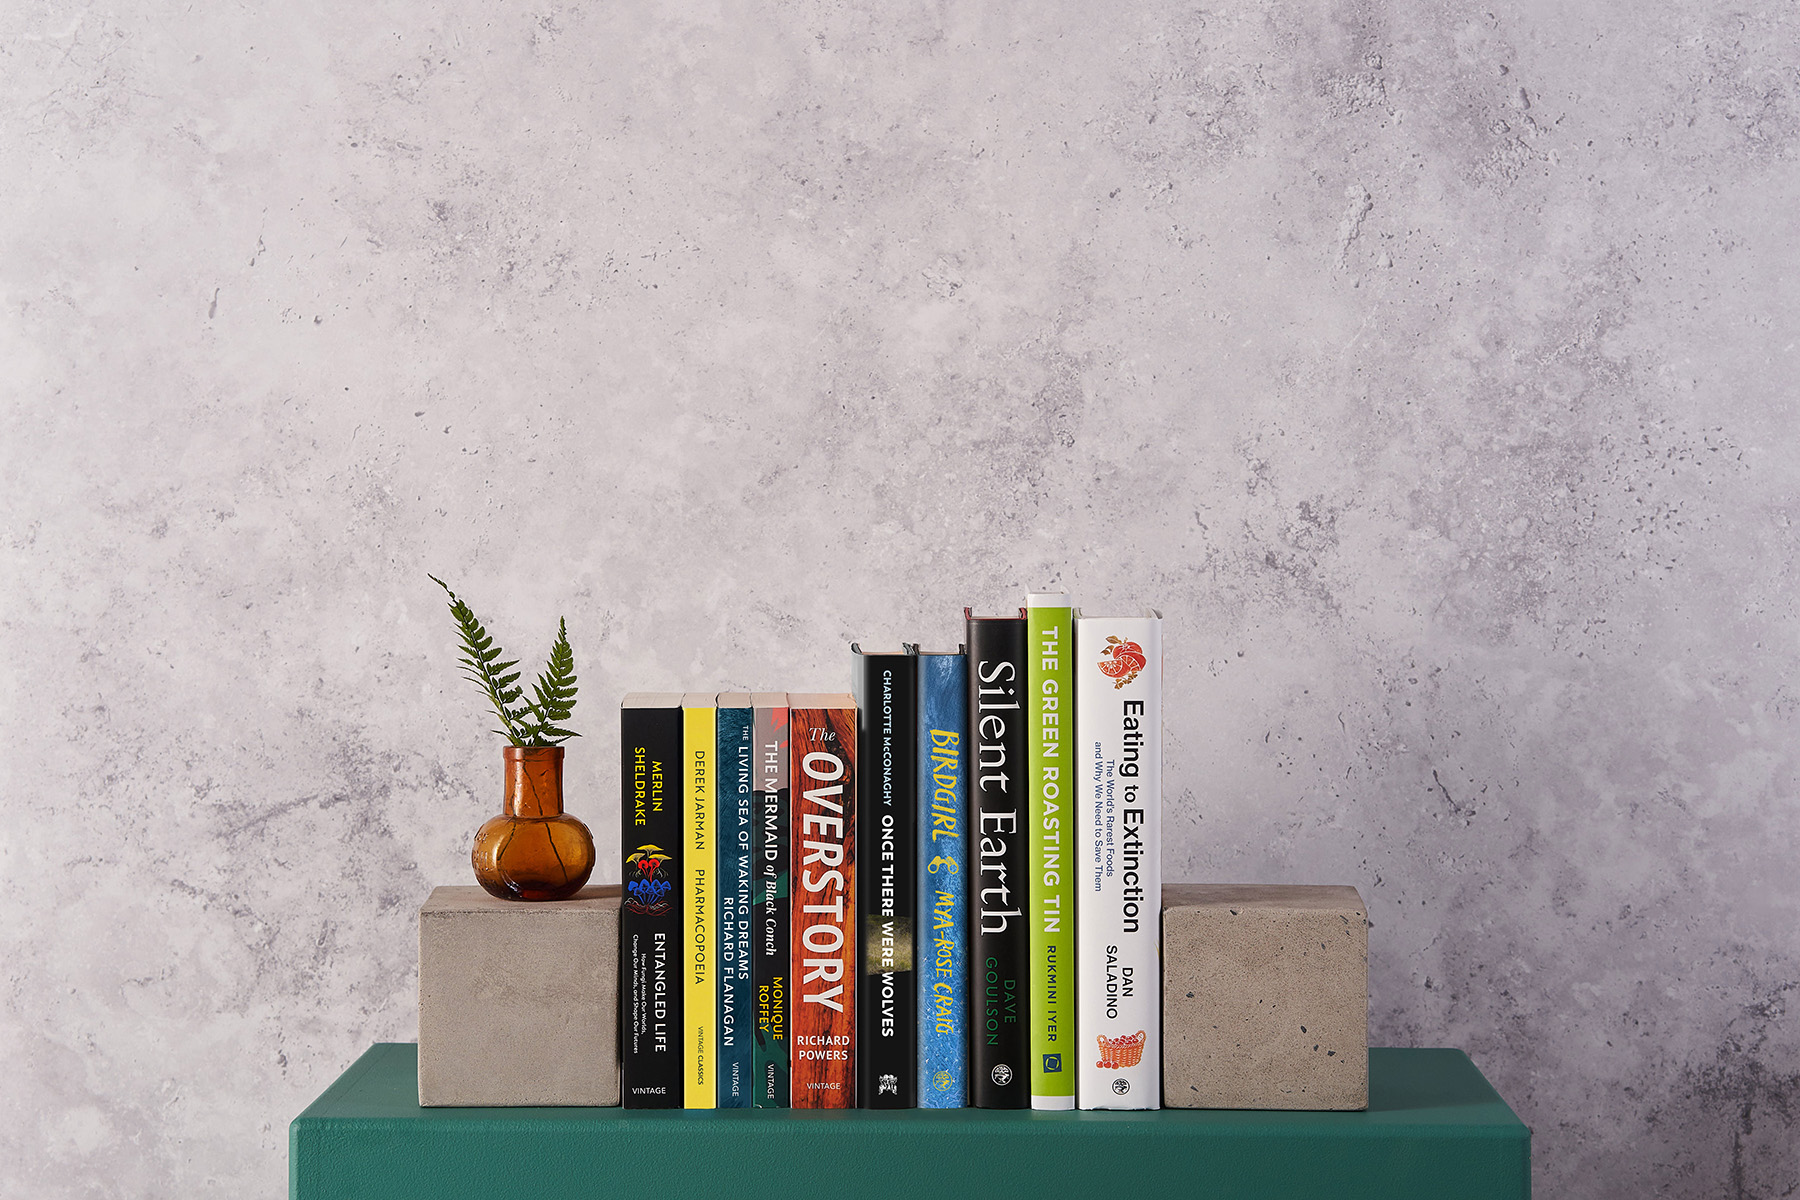 Vintage books on nature lined up on a green shelf, spines facing outwards, against a stone background.